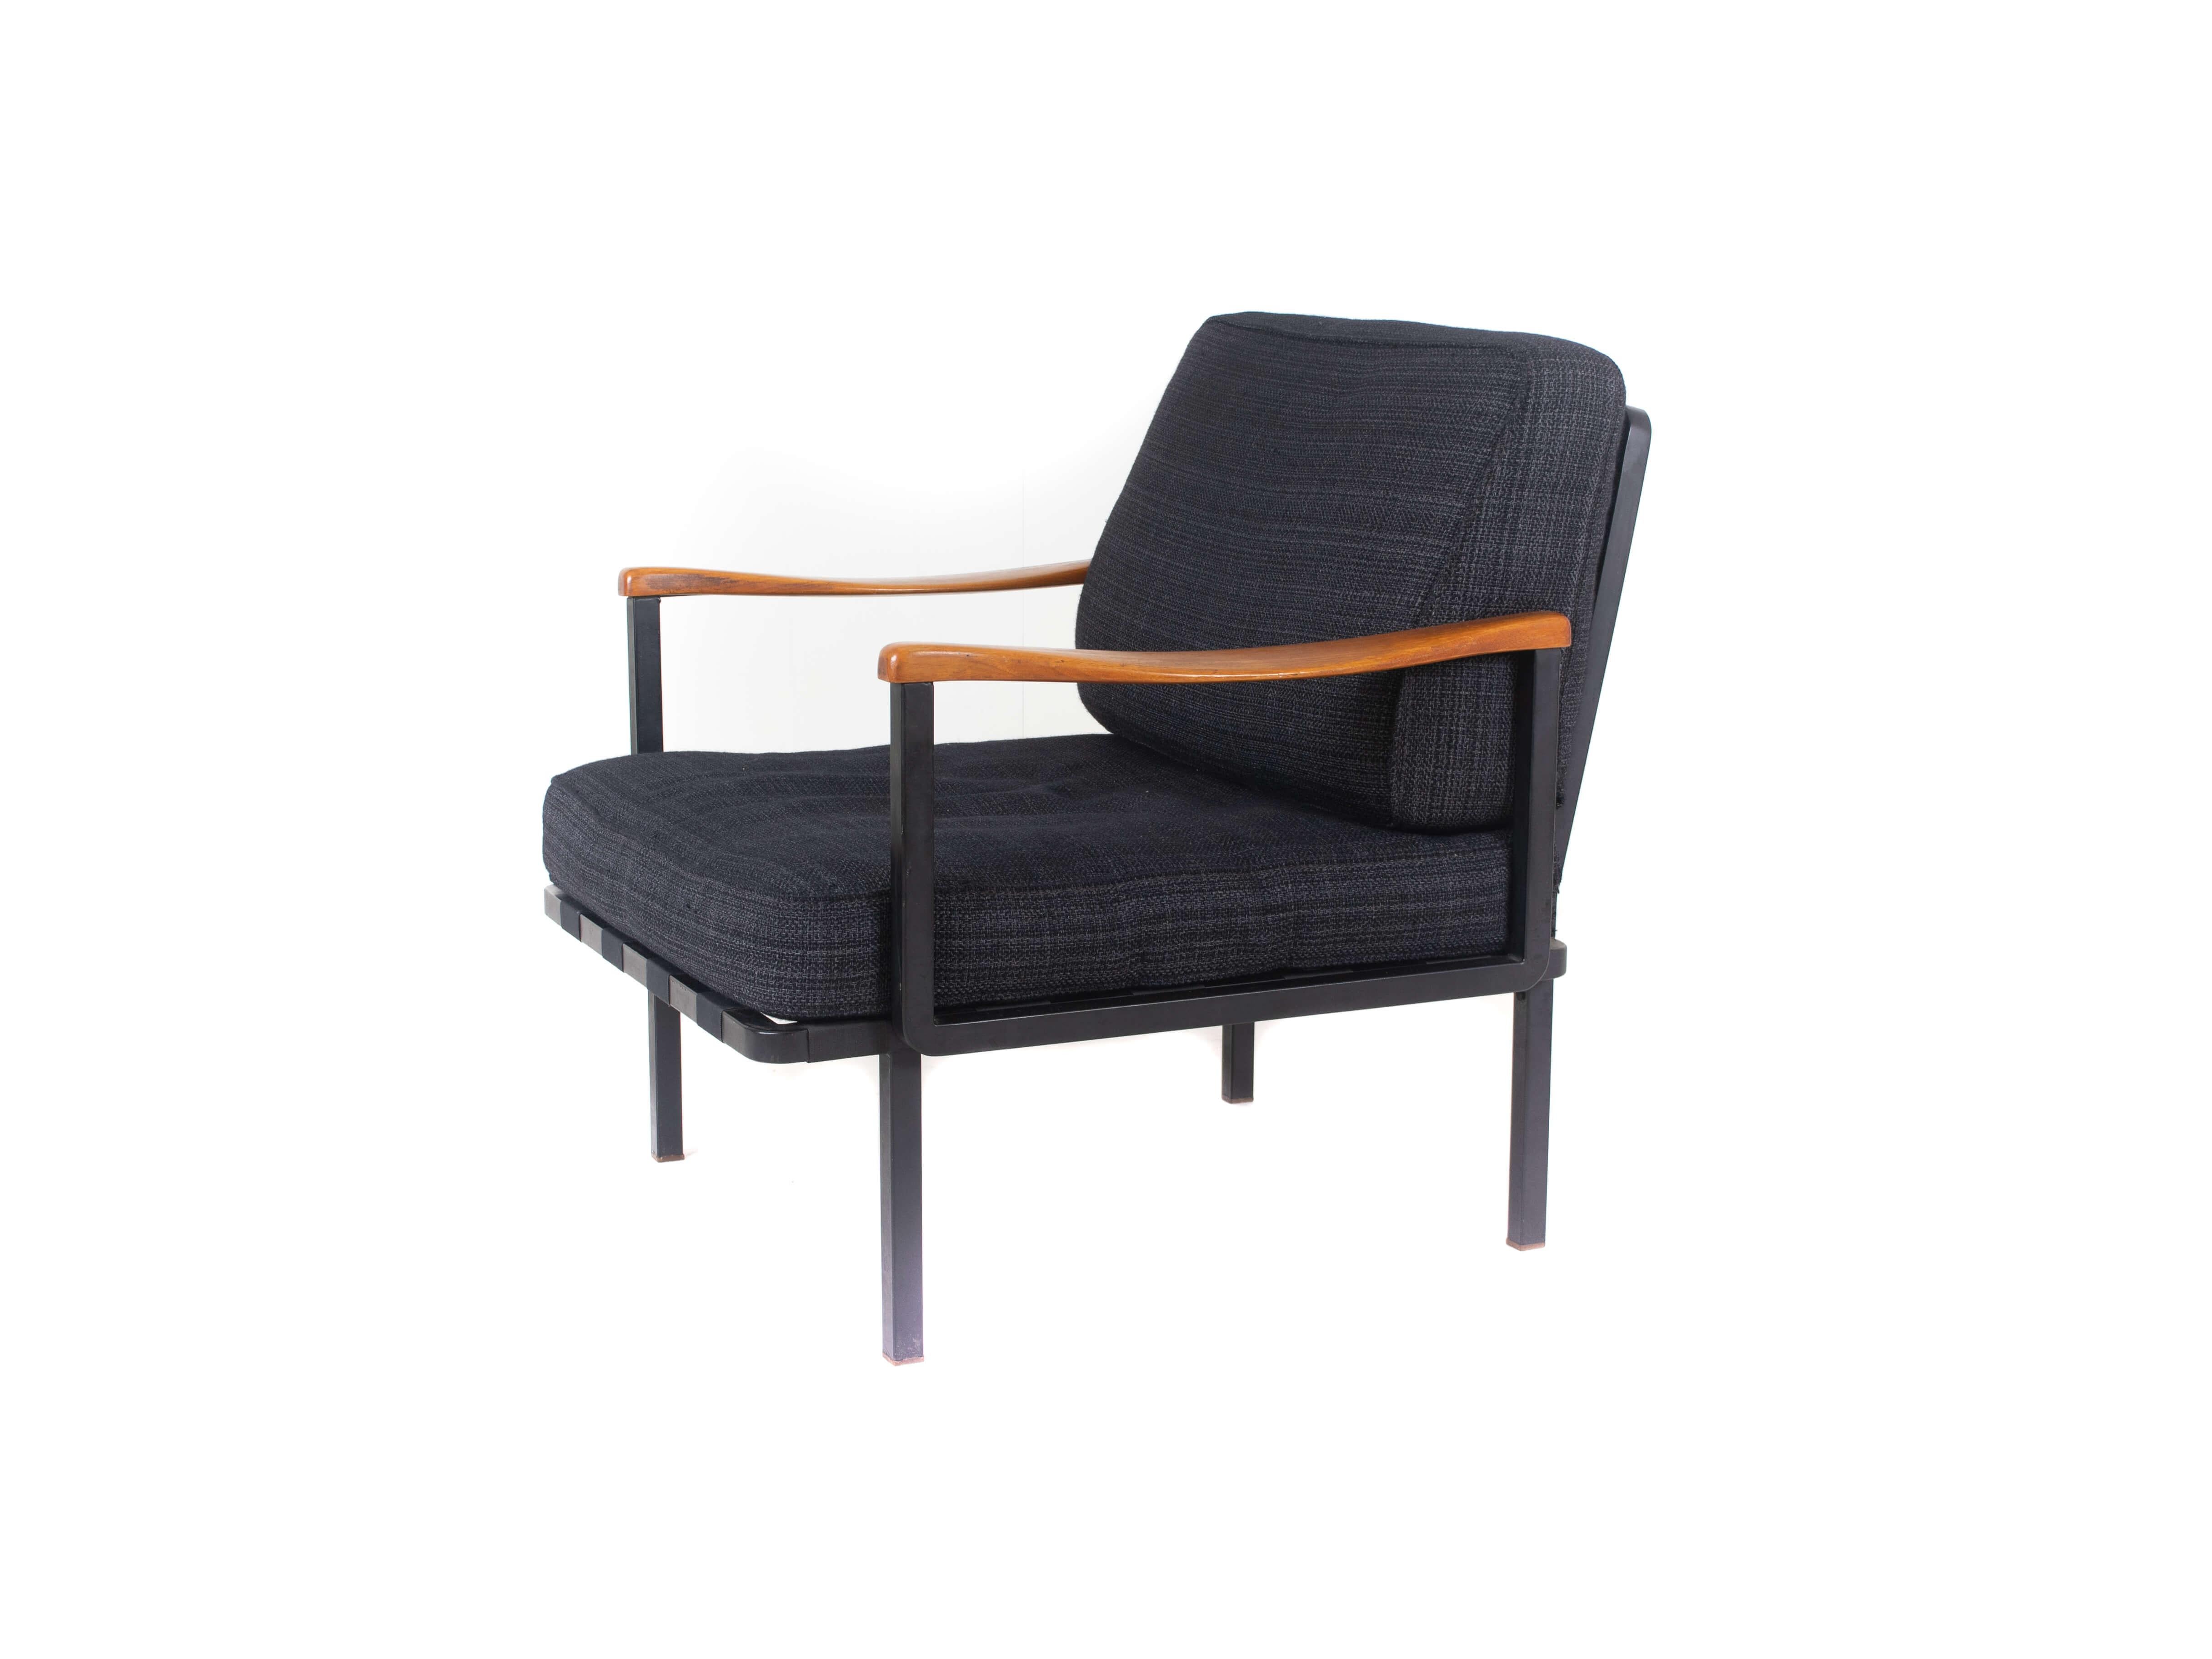 Impressive Italian Modern Osvaldo Borsani arm chair Model P24 by Tecno from Italy 1961. Wooden armrests in combination with the metal frame make this an interesting and timeless piece. Hard to believe this vintage chair is over 60 years old. The